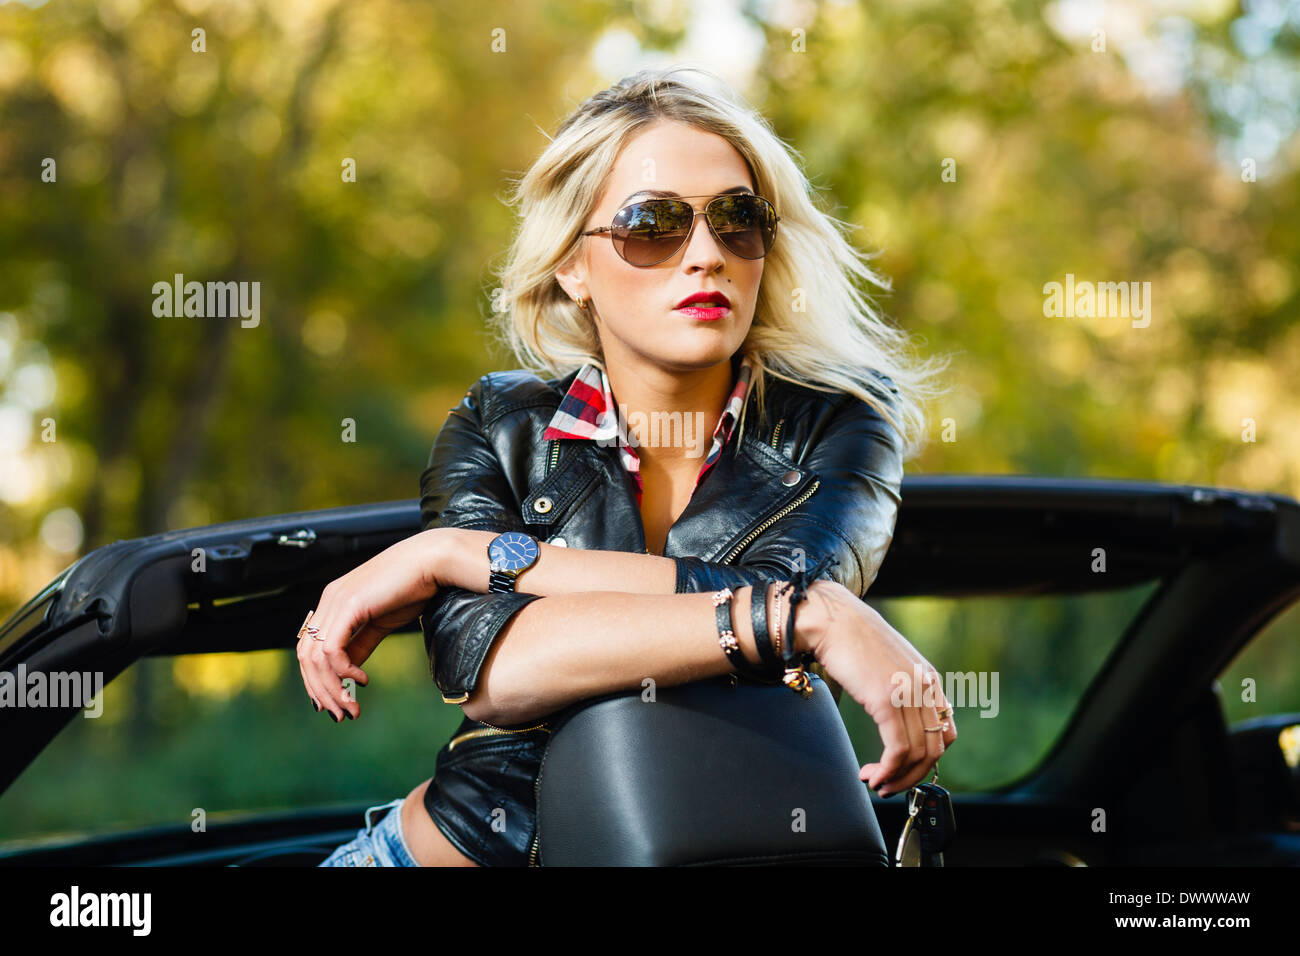 Blond woman in leather jacket and jeans shorts in convertible car. Stock Photo